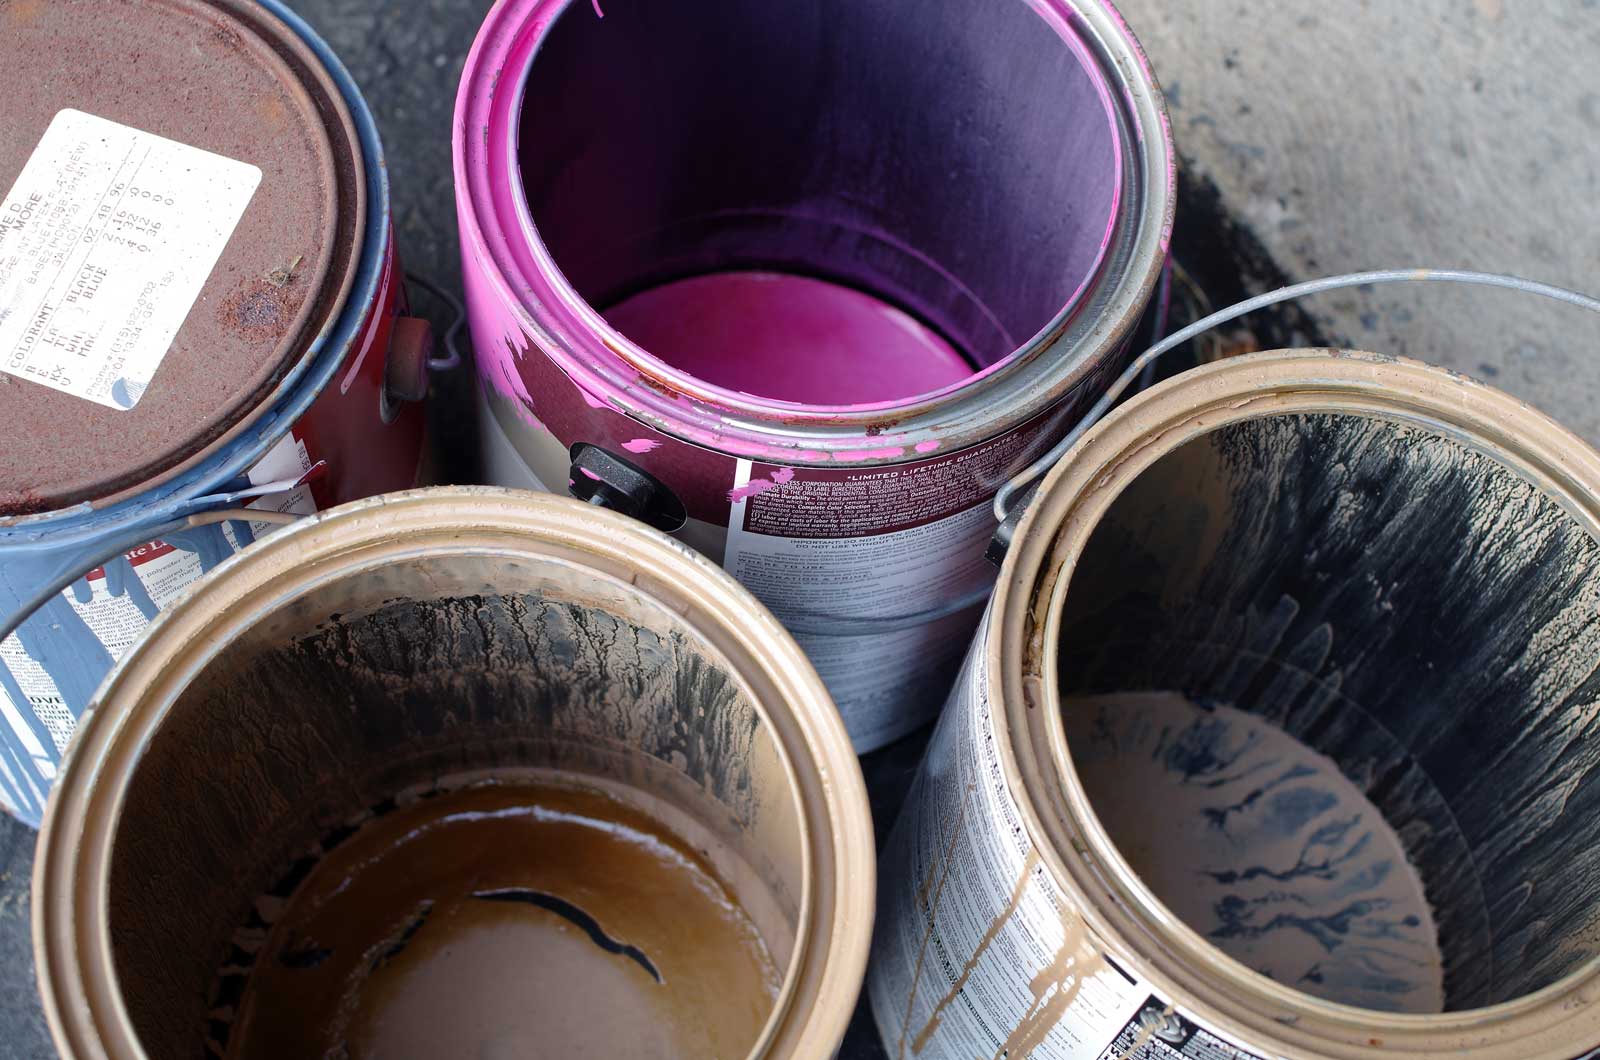 Empty paint cans for recycling